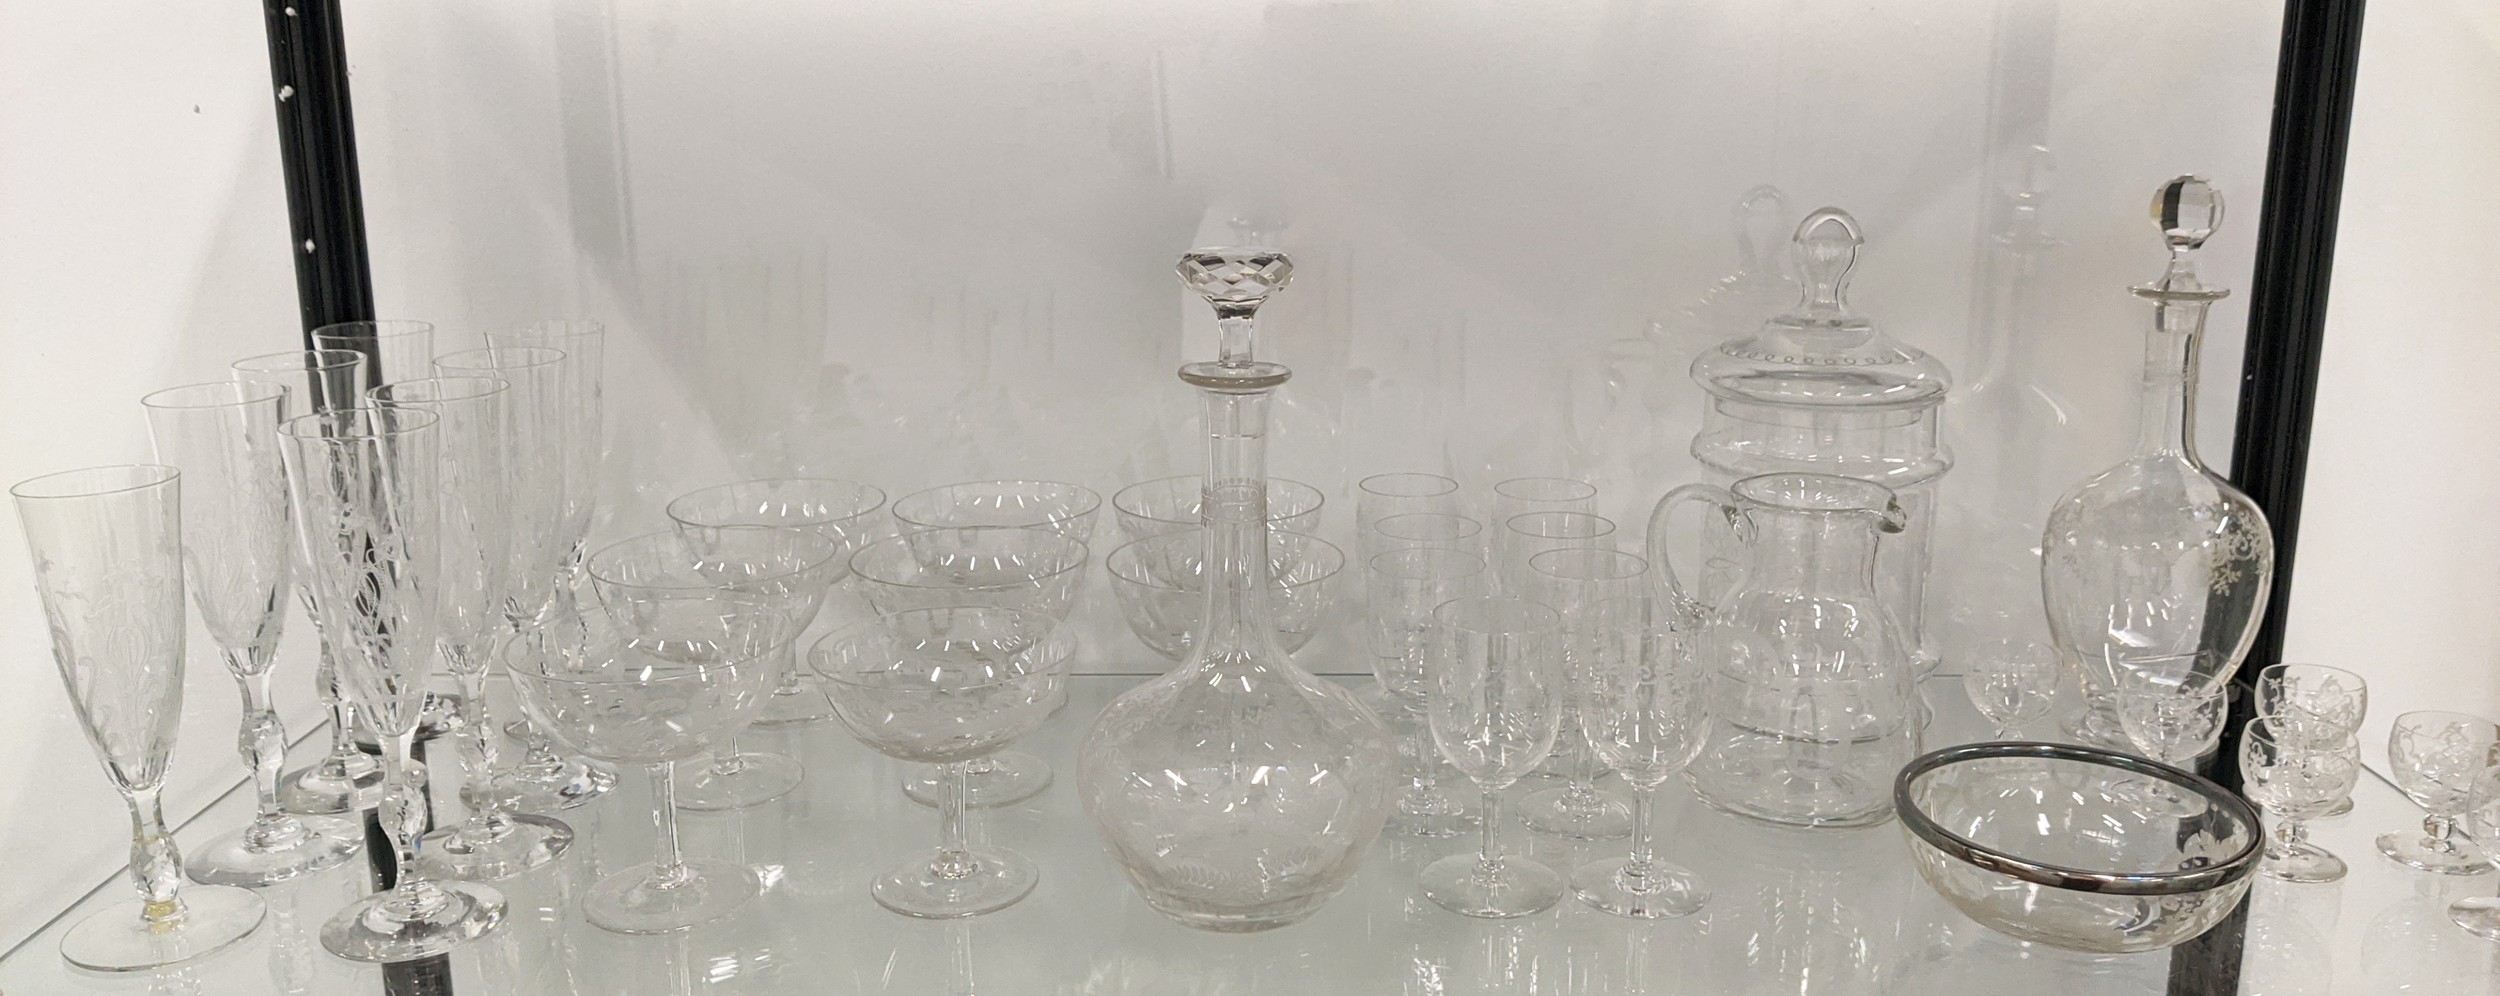 QUANTITY OF ENGRAVED GLASSWARE, including eight champagne flutes, decanter vodka glass set, eight - Image 3 of 9